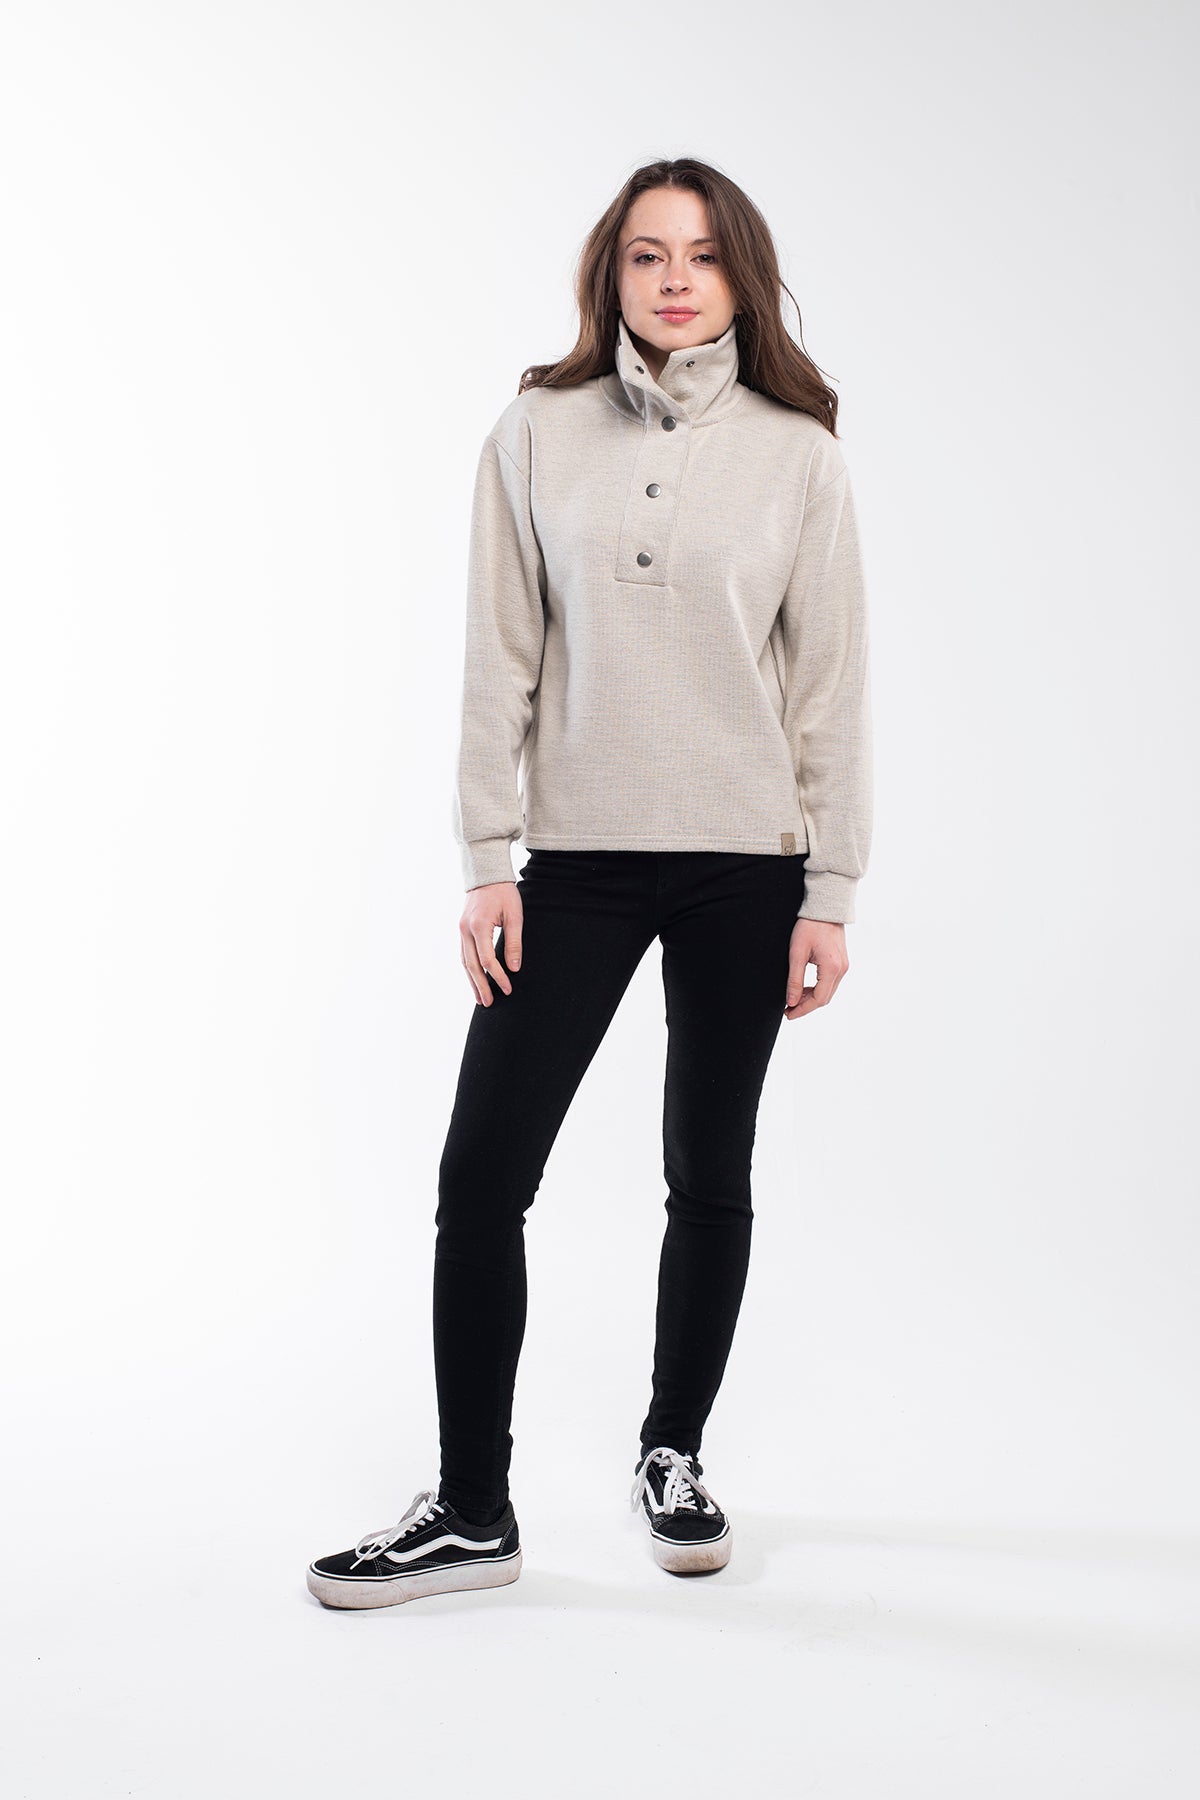 Regular fit high neck buttoned sweater in beige white with side buttons.